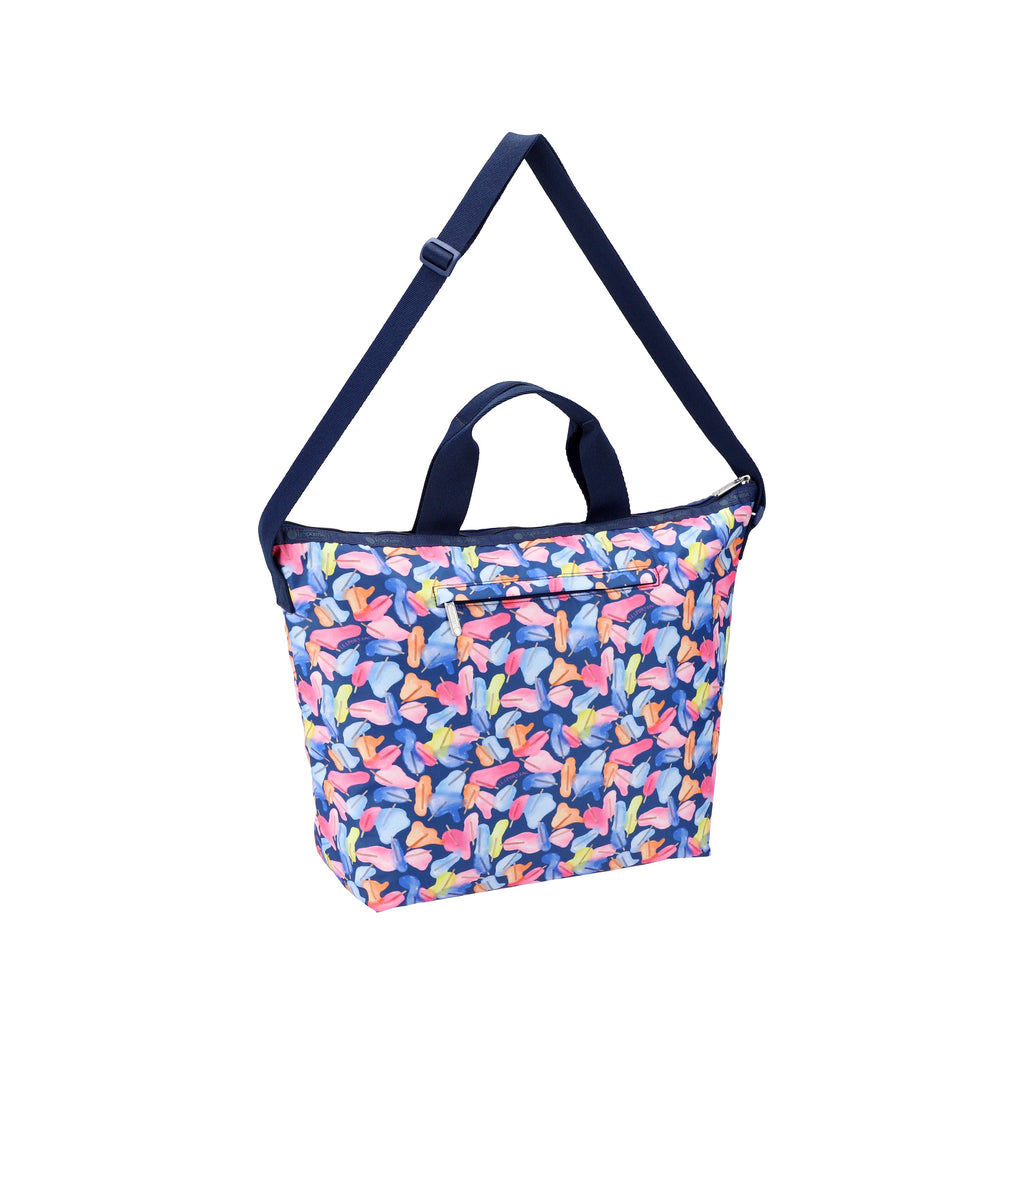 Deluxe Easy Carry Tote - 24256288817200